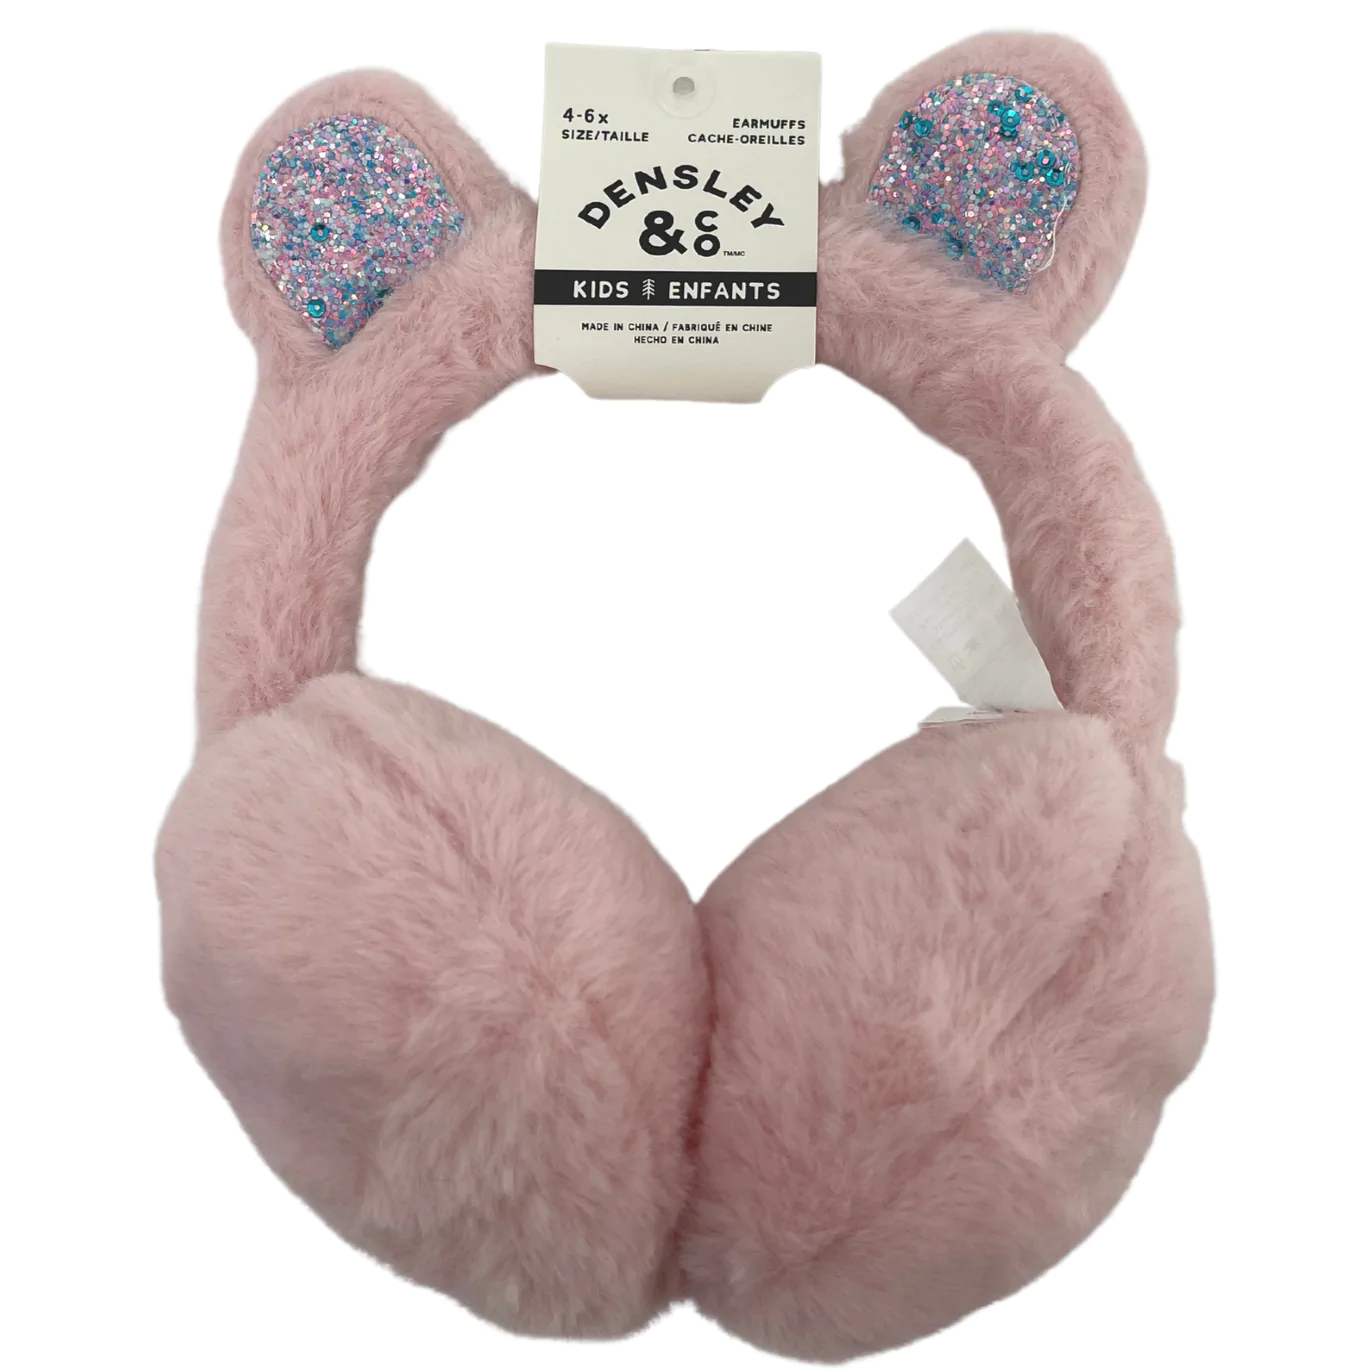 Densley & Co Girl's Youth Earmuffs / Outdoor Winter Gear / Light Pink with Ears